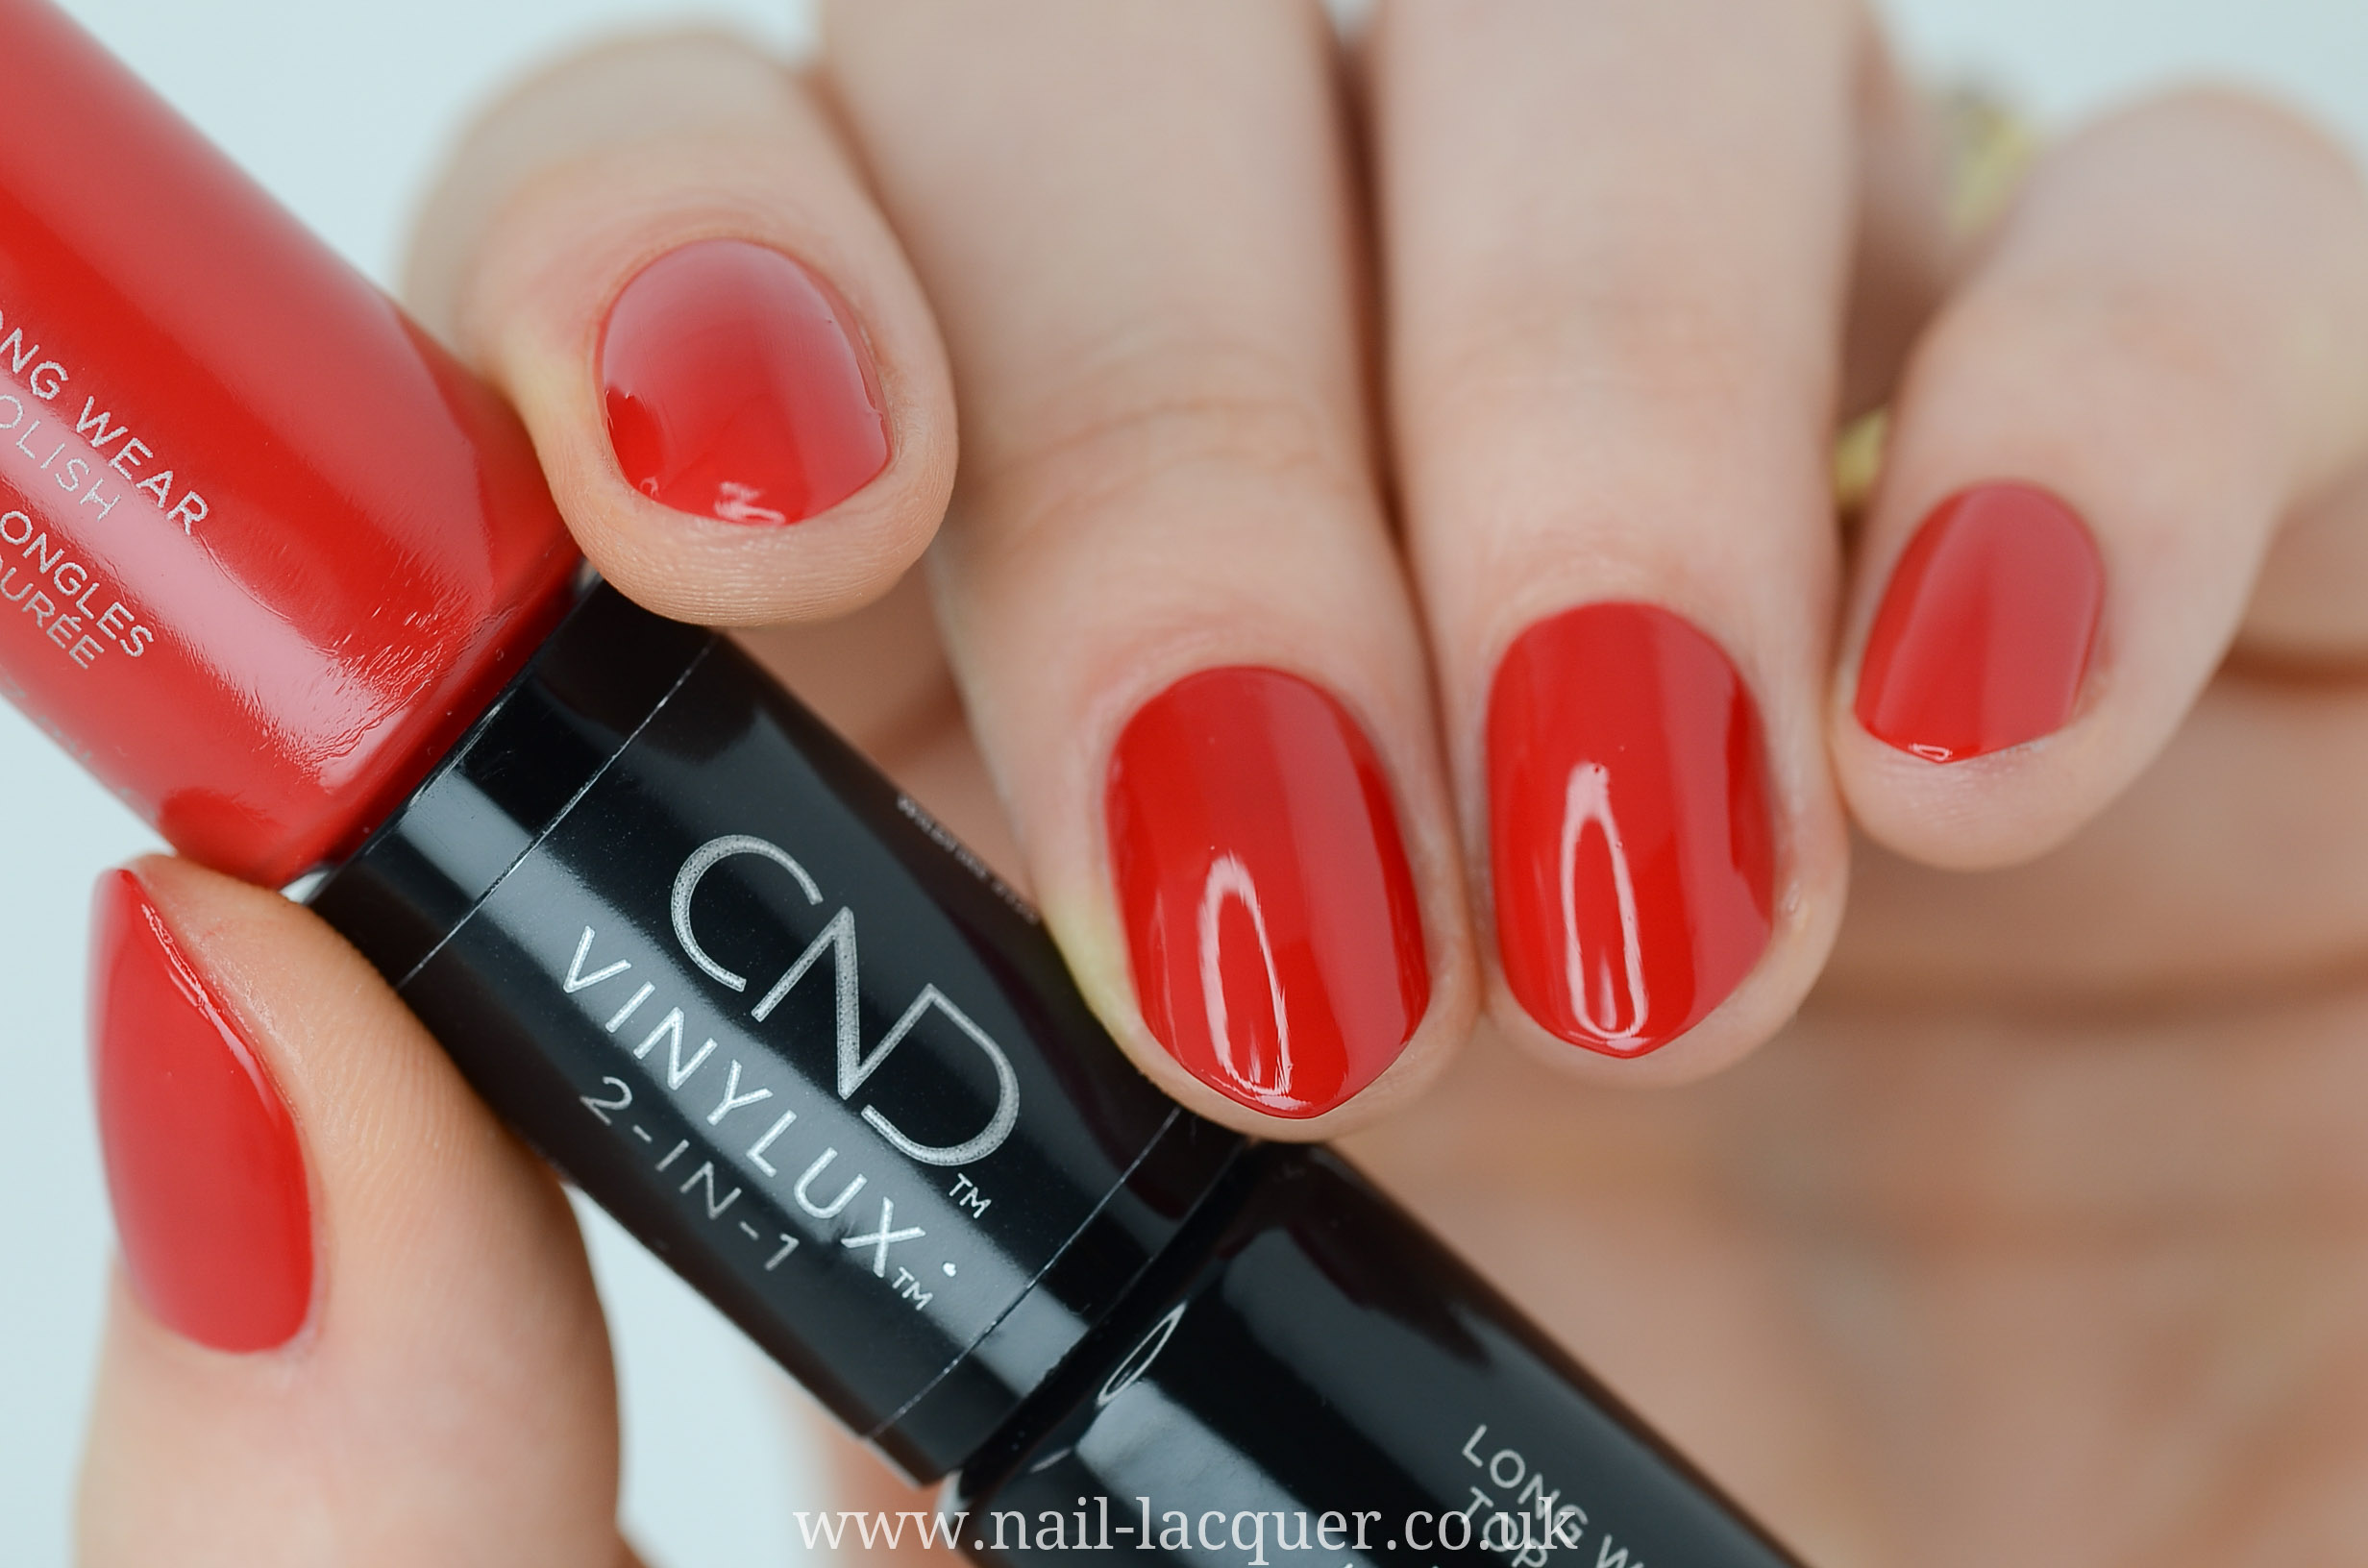 1. CND Vinylux Long Wear Nail Polish in "New Wave" - wide 9